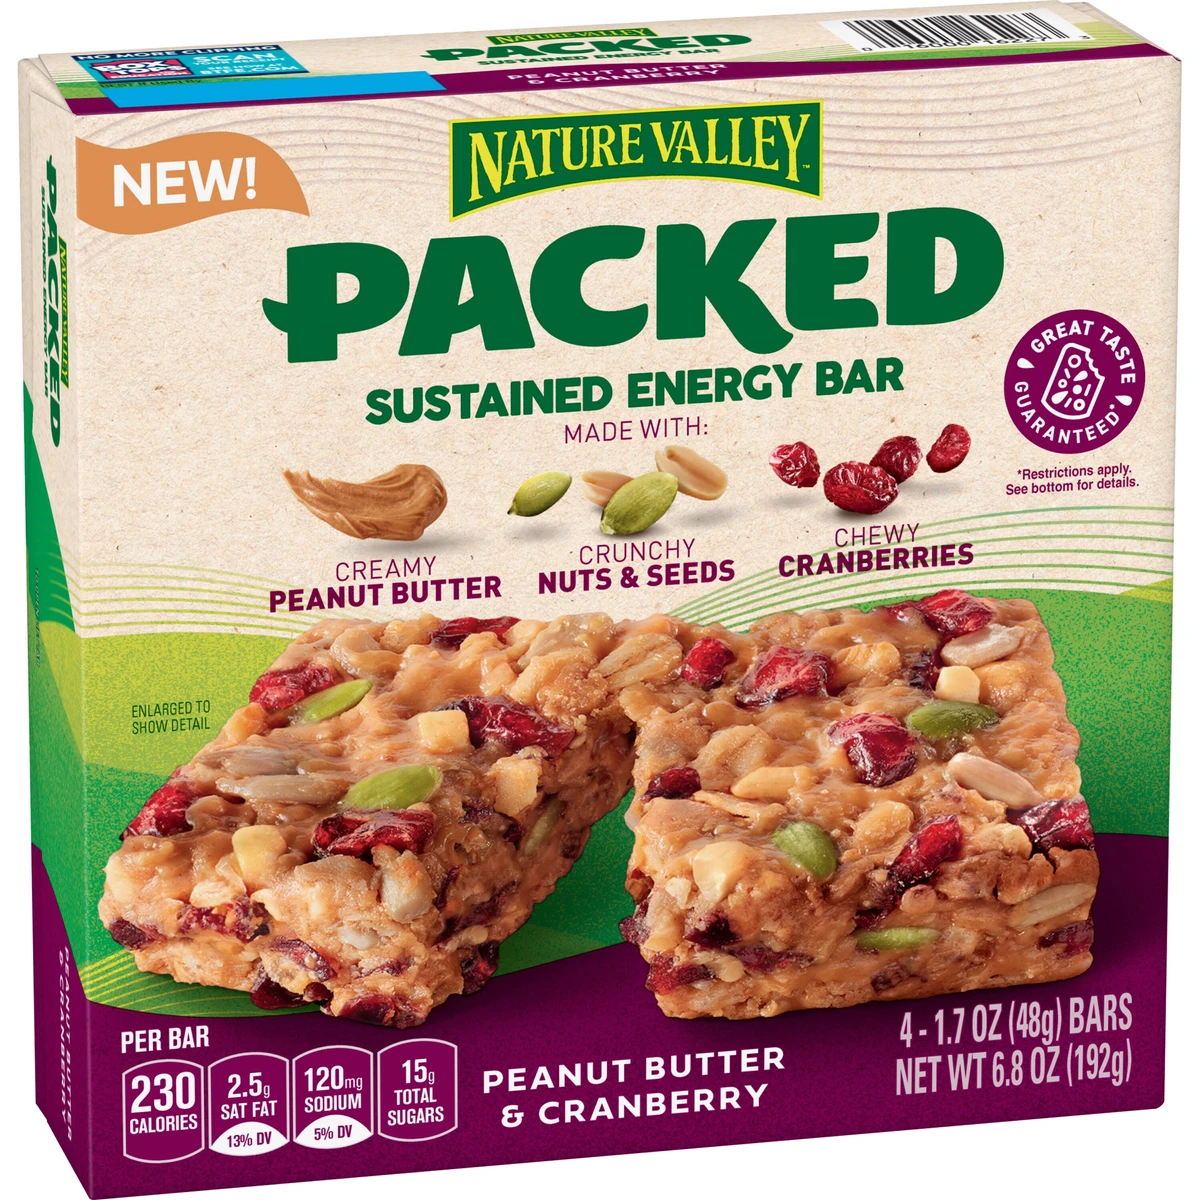 Nature Valley Packed Sustained Energy Bar Peanut Butter & Cranberry  6.8oz